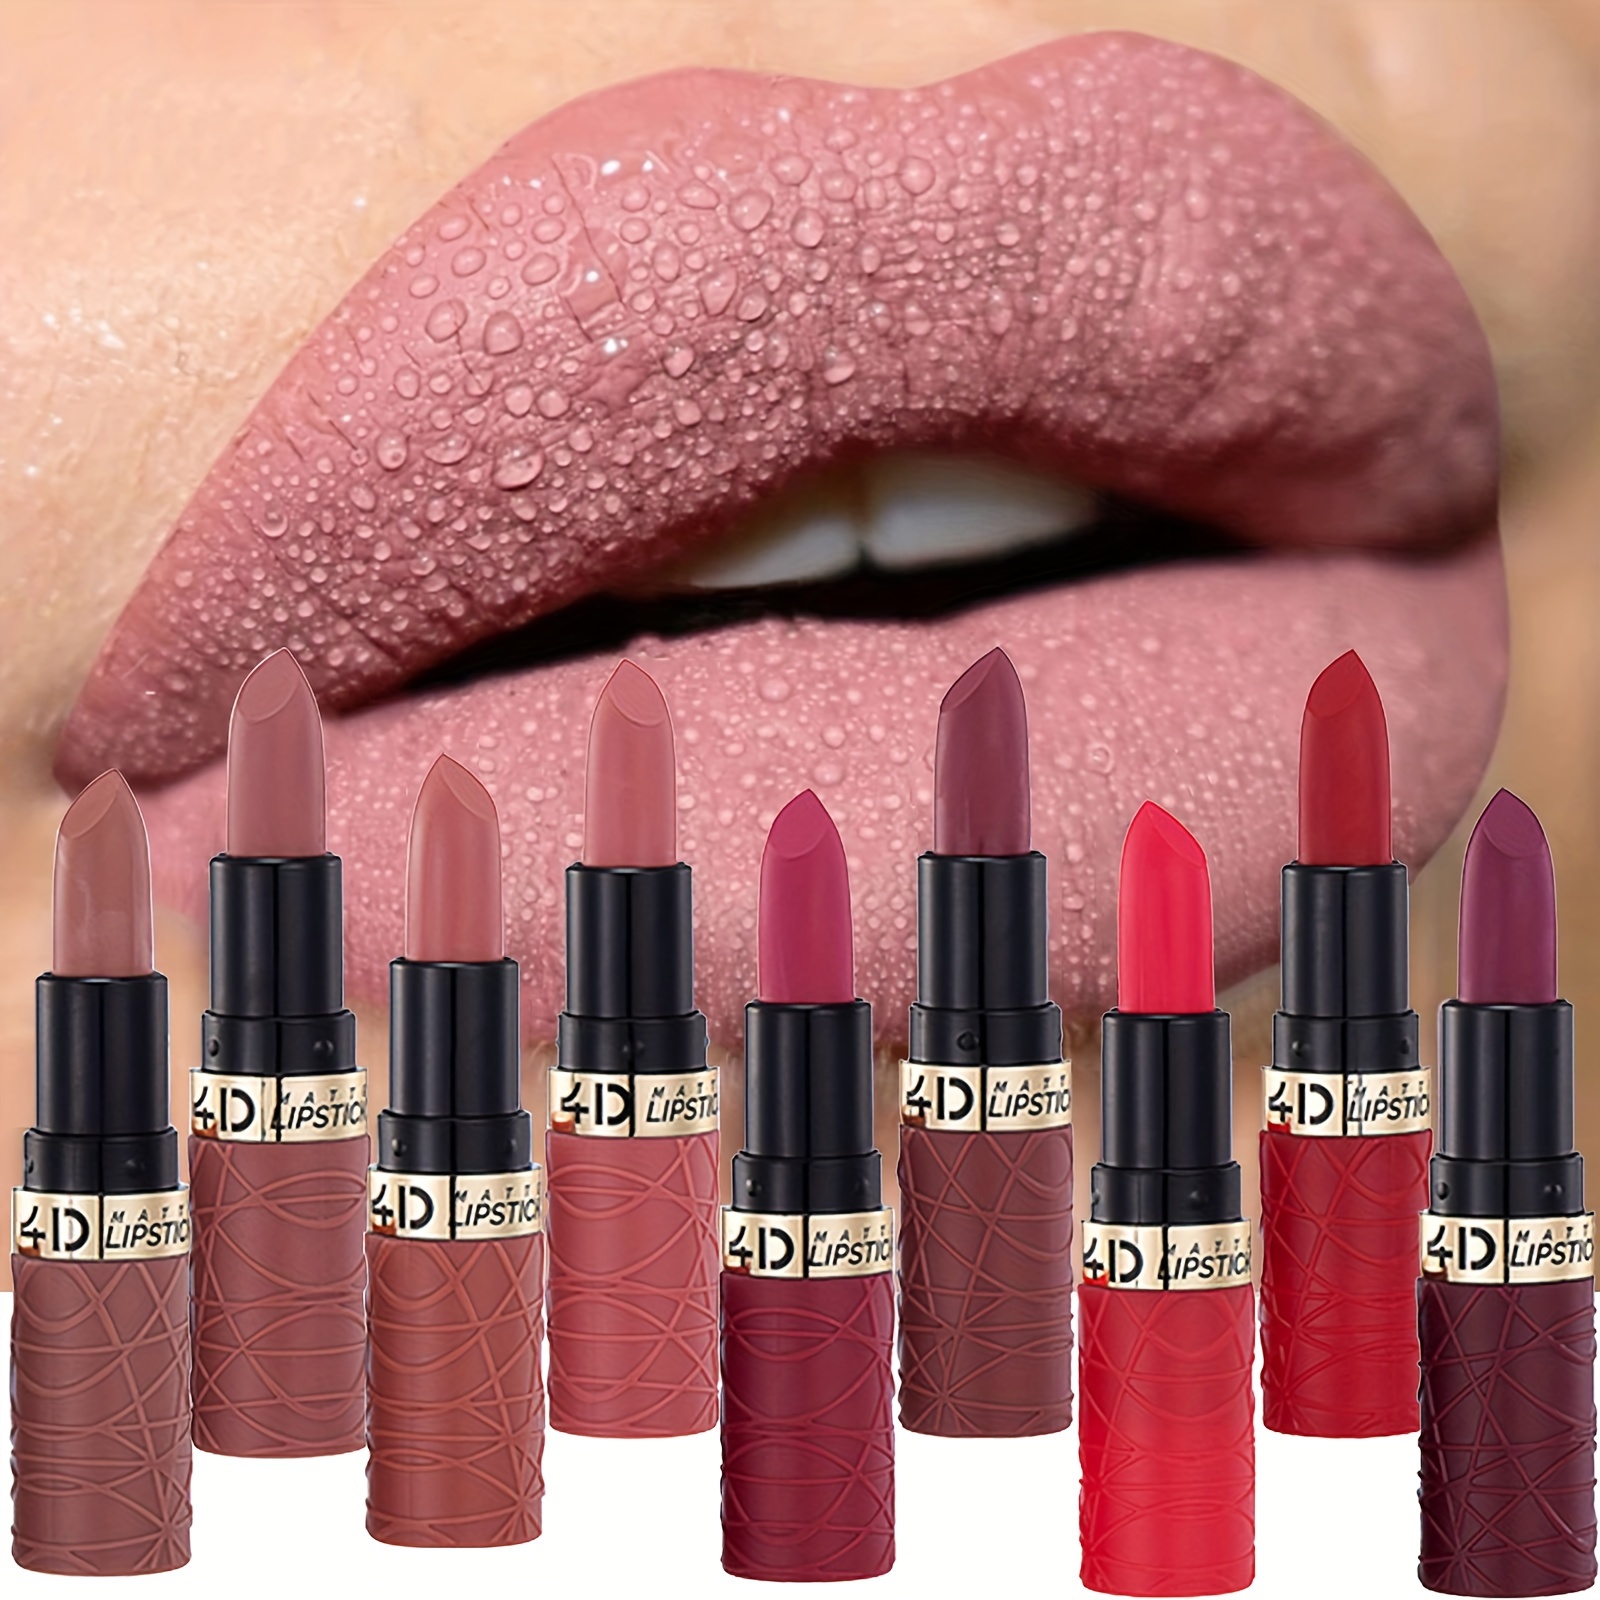 

12 Colors Matte Lipstick 4d Rich Color Rendering Lip Gloss Long Lasting Moisturizing Cosmetic Red Dusty Rose Lipstick Crayon Lip Makeup For Women